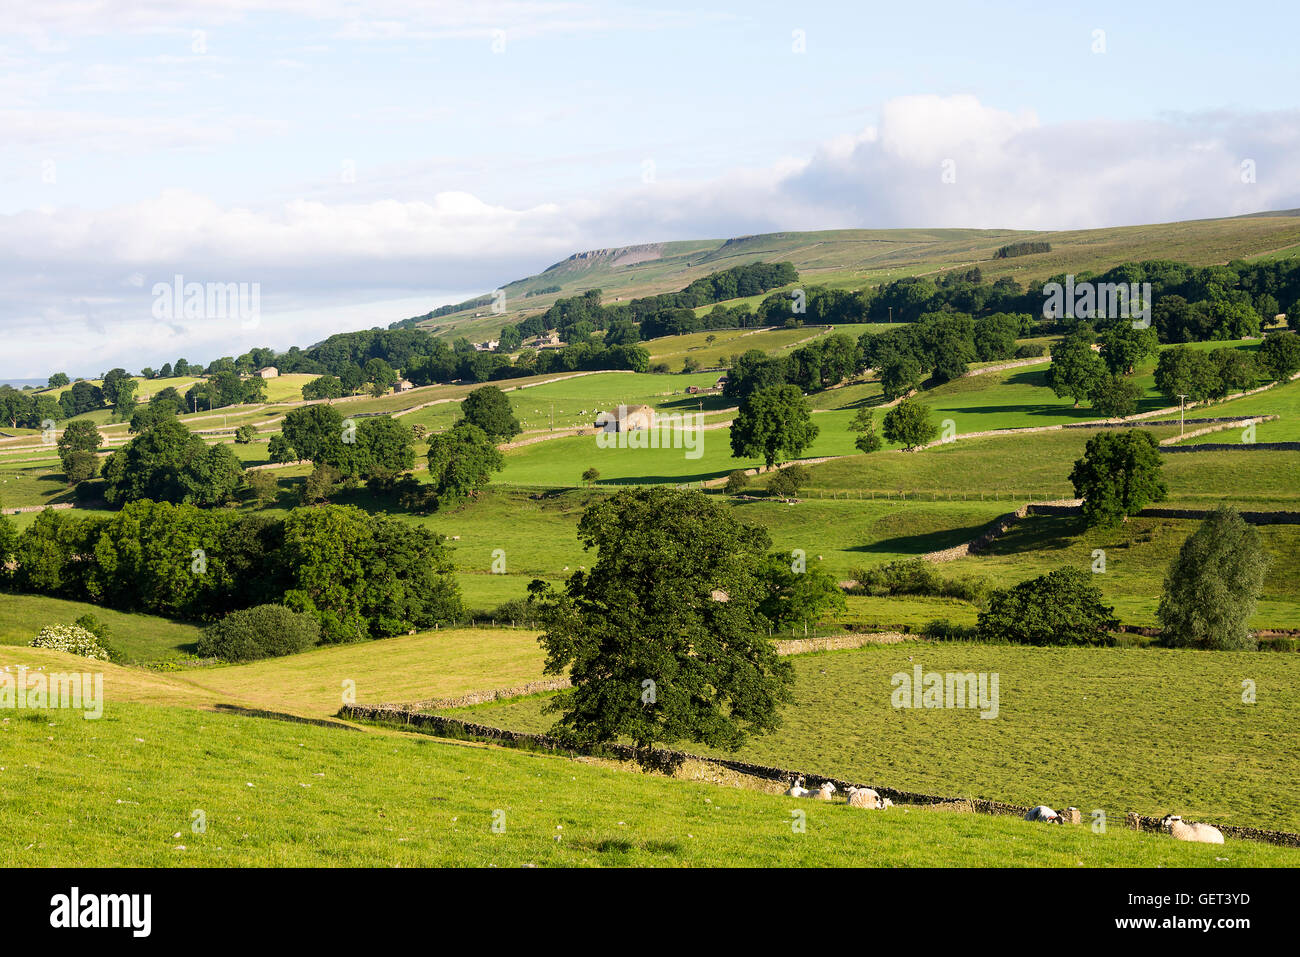 Sheep Resting and Grazing in Fields with Pike Hill and Stags Fell near Bainbridge Yorkshire Dales National Park England United Kingdom UK Stock Photo